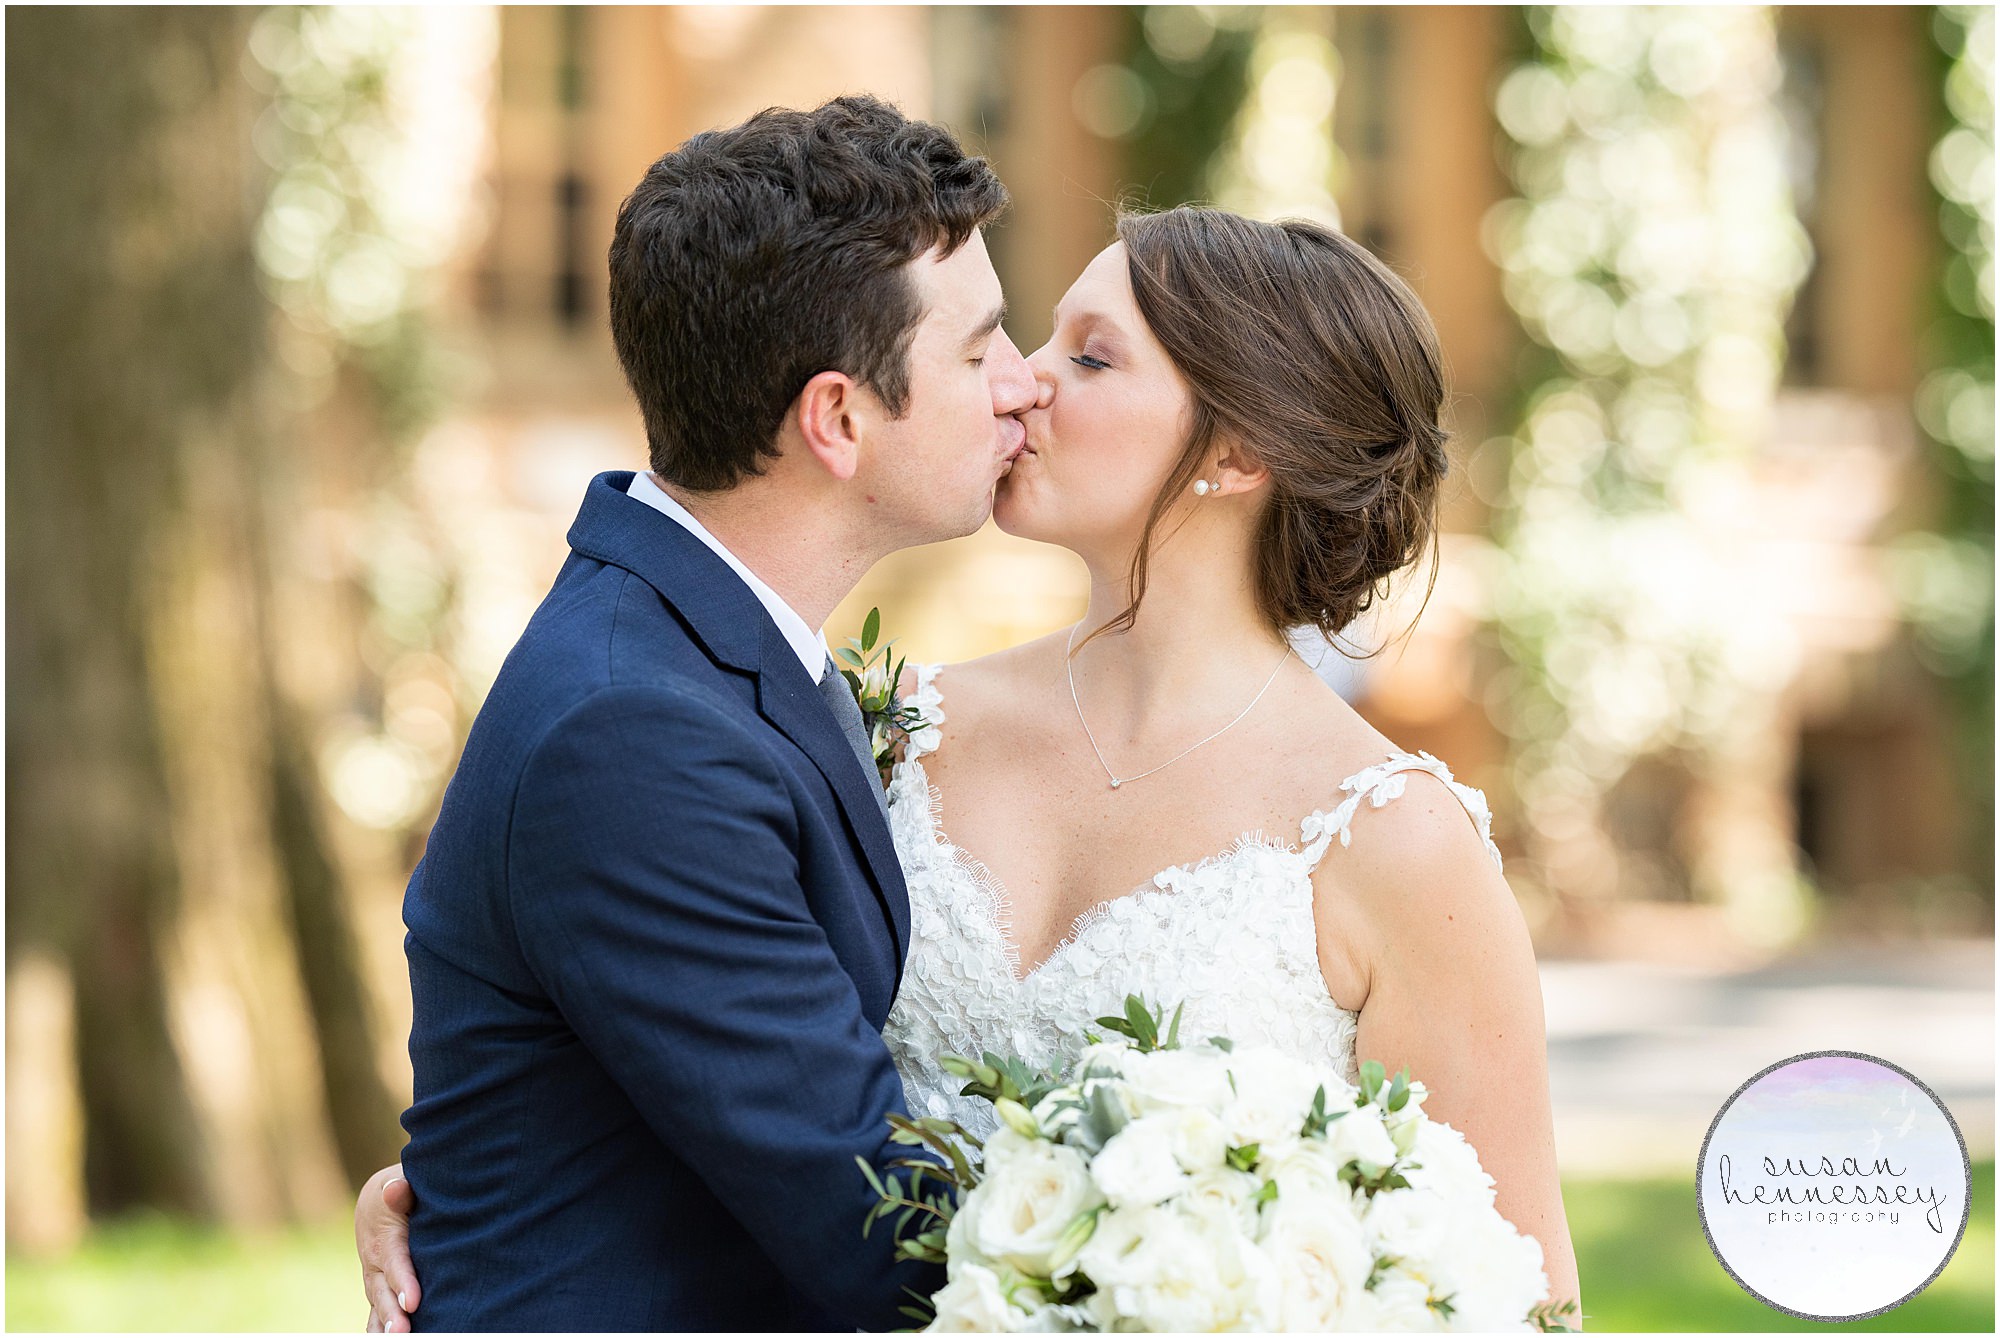 A bride and groom kiss on their wedding day